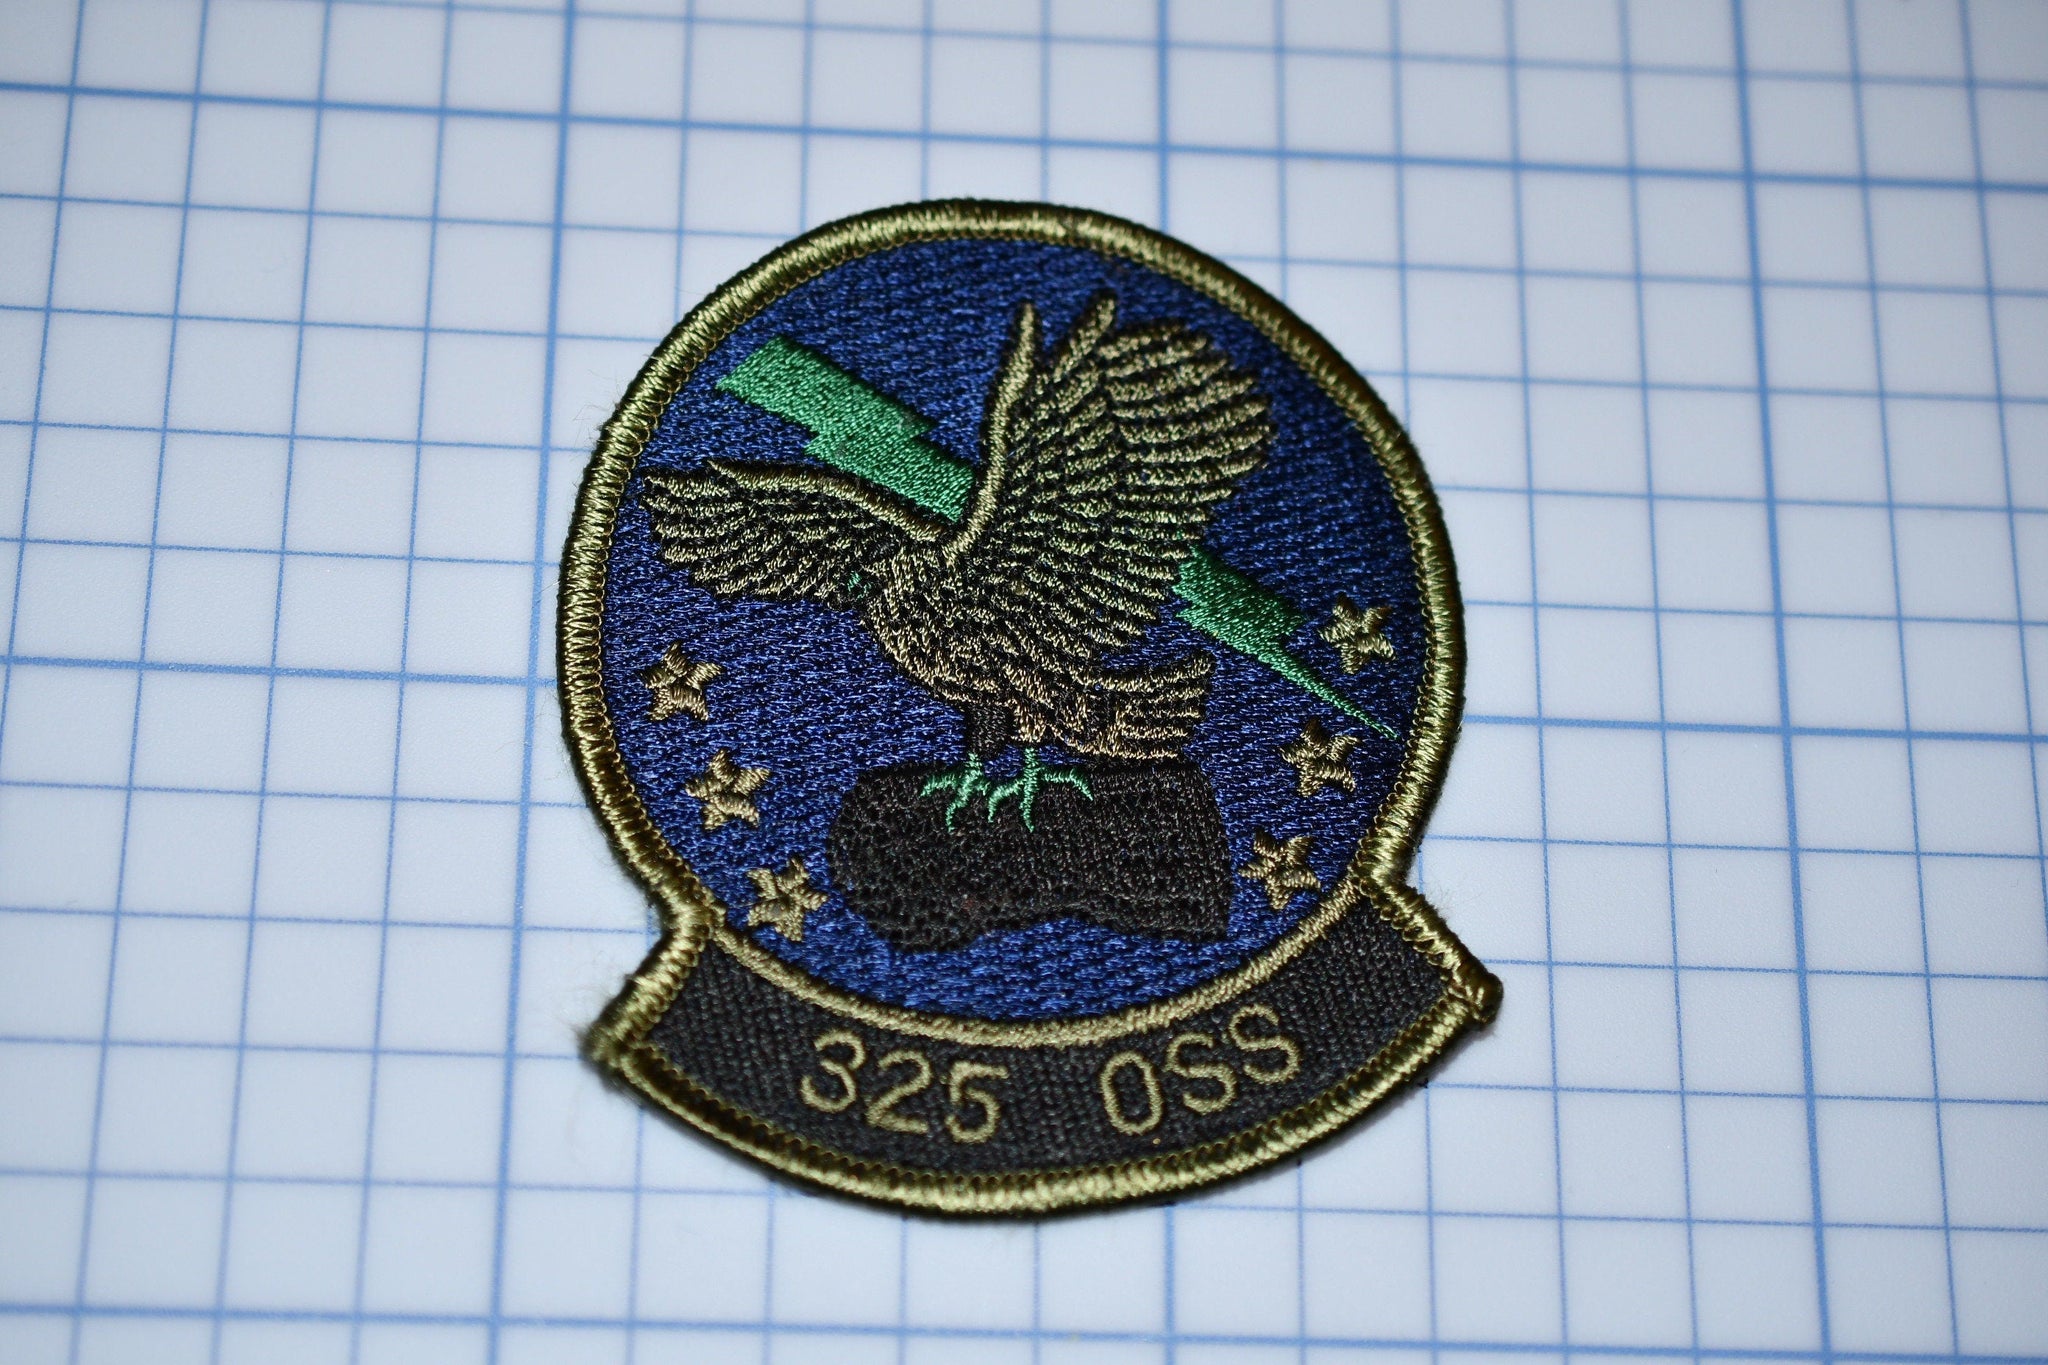 USAF 325 Operational Support Squadron Patch (B21-166)